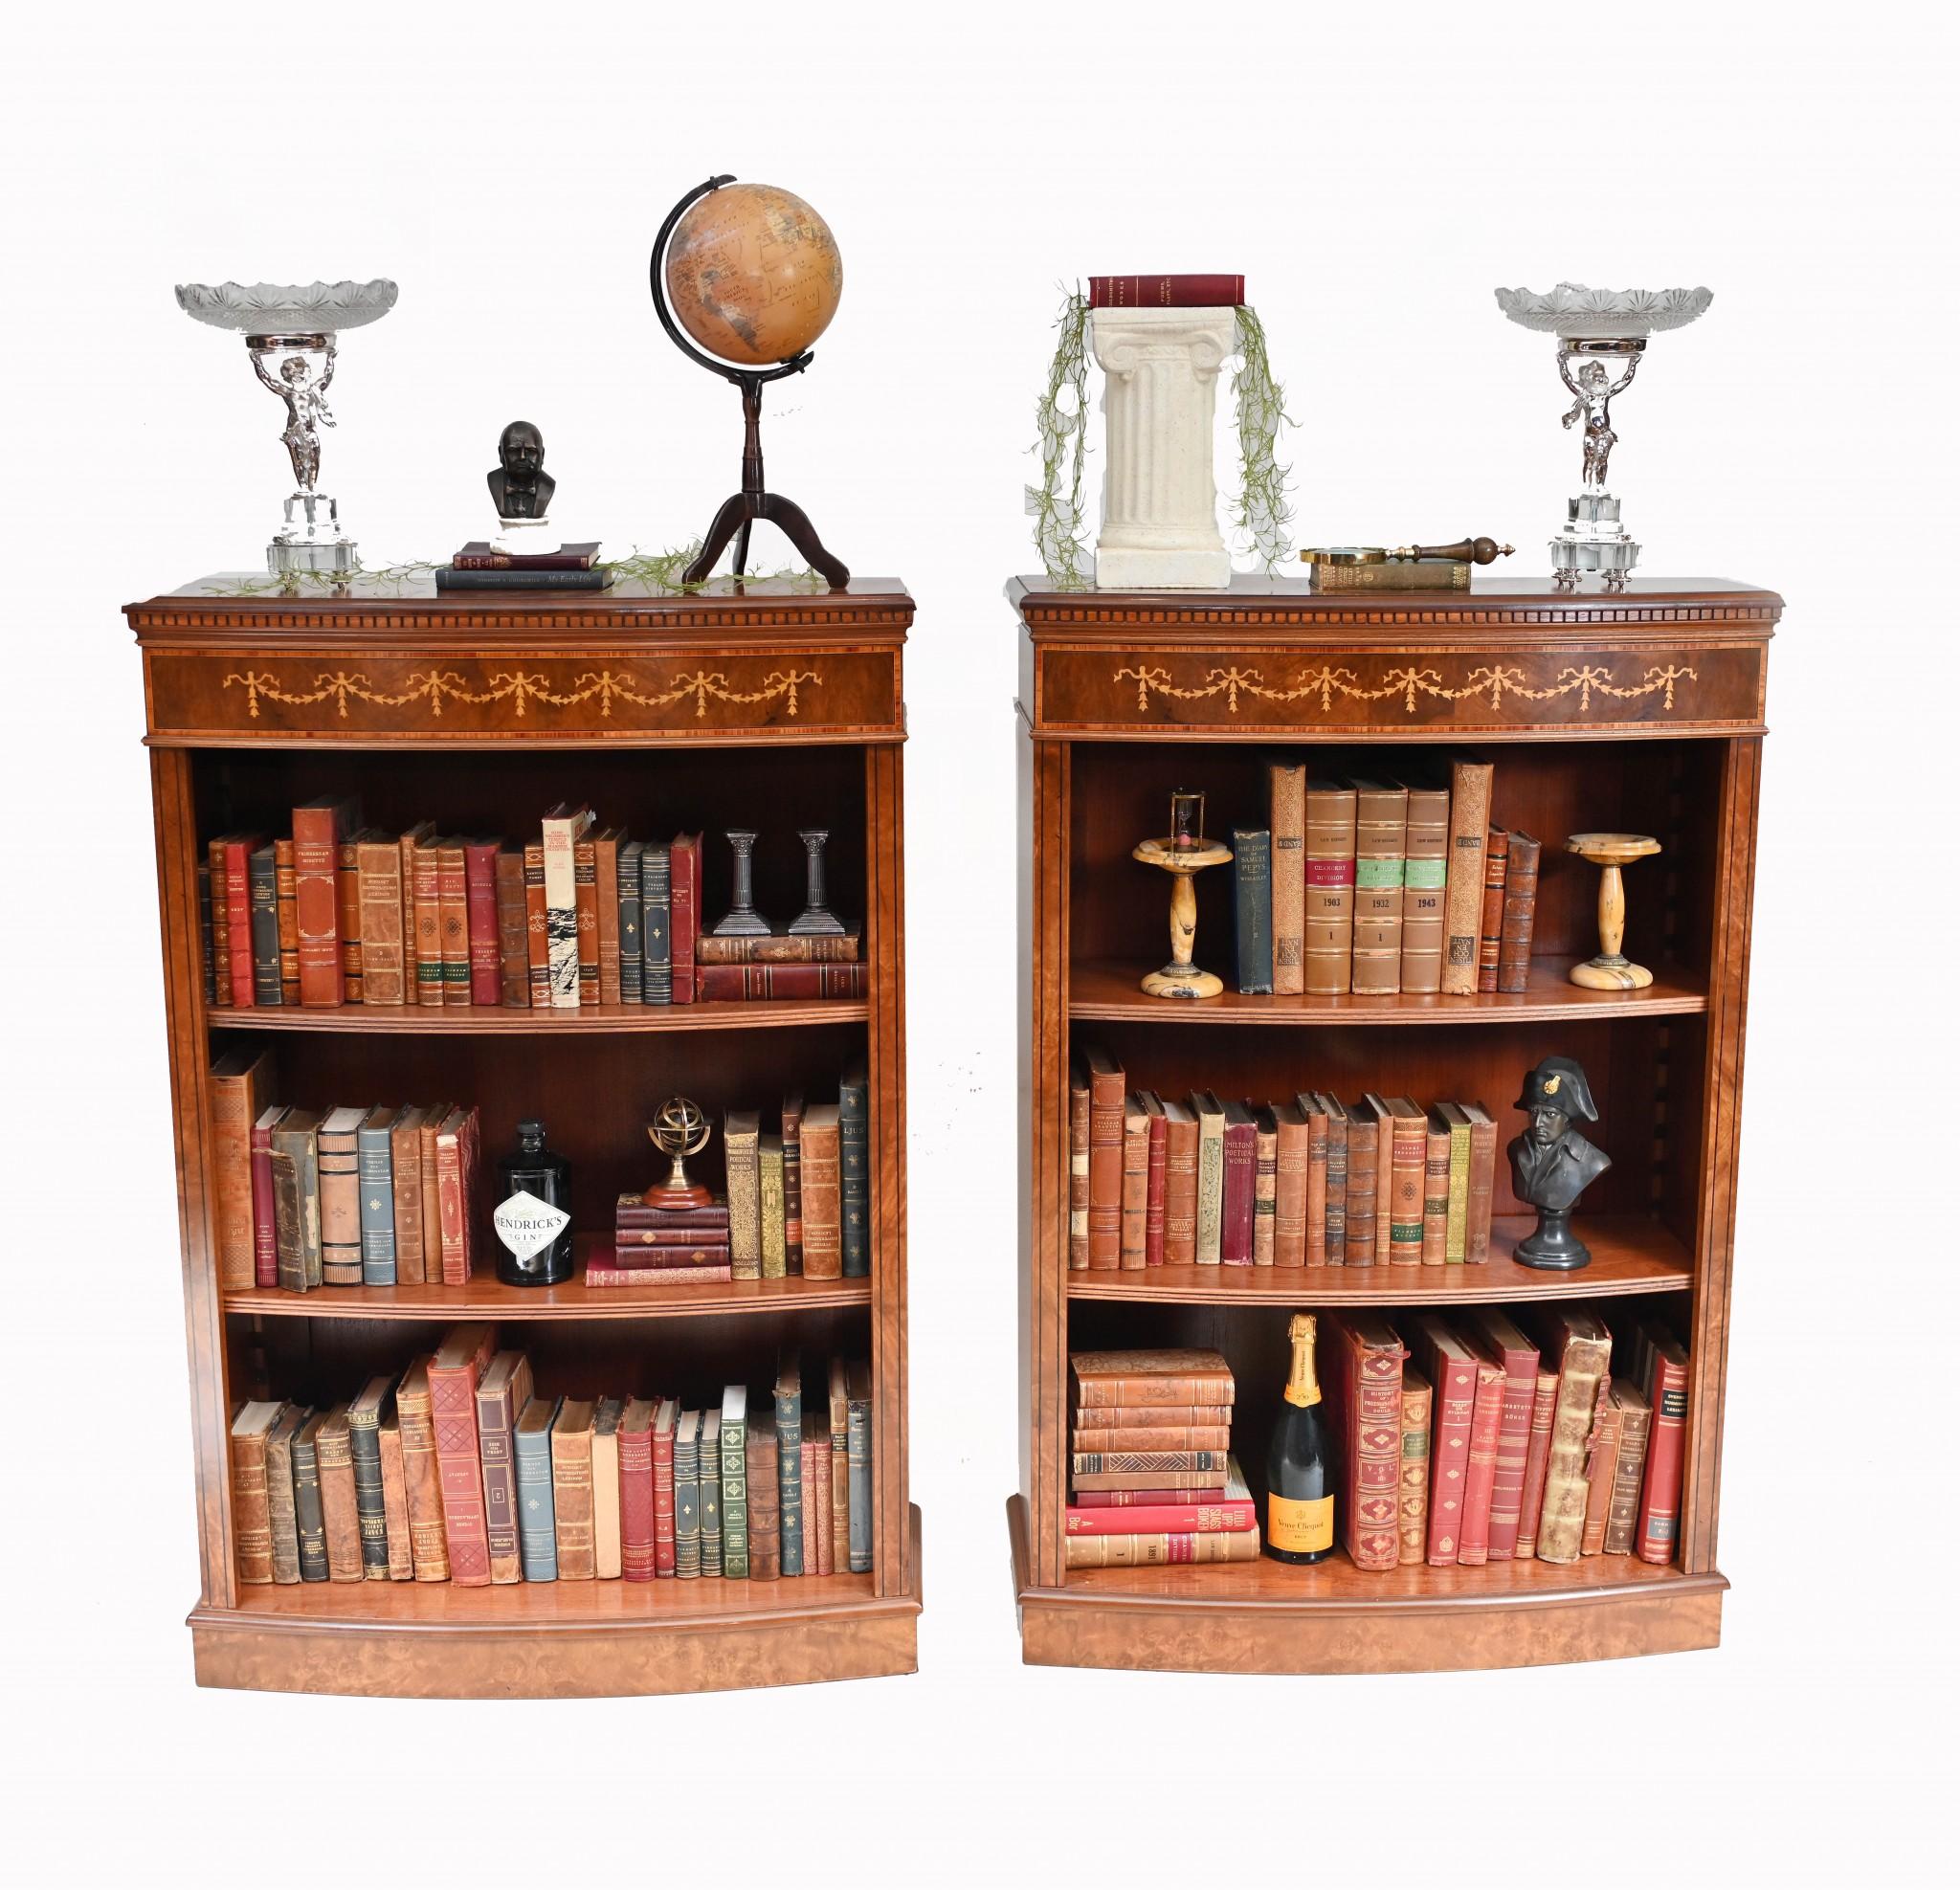 Wonderful pair of walnut open front bookcases in the Sheraton manner
Hand crafted from walnut with satinwood inlay, these are the ultimate in classic English library furniture
The front sees the garlands and reefs inlaid into the walnut, another